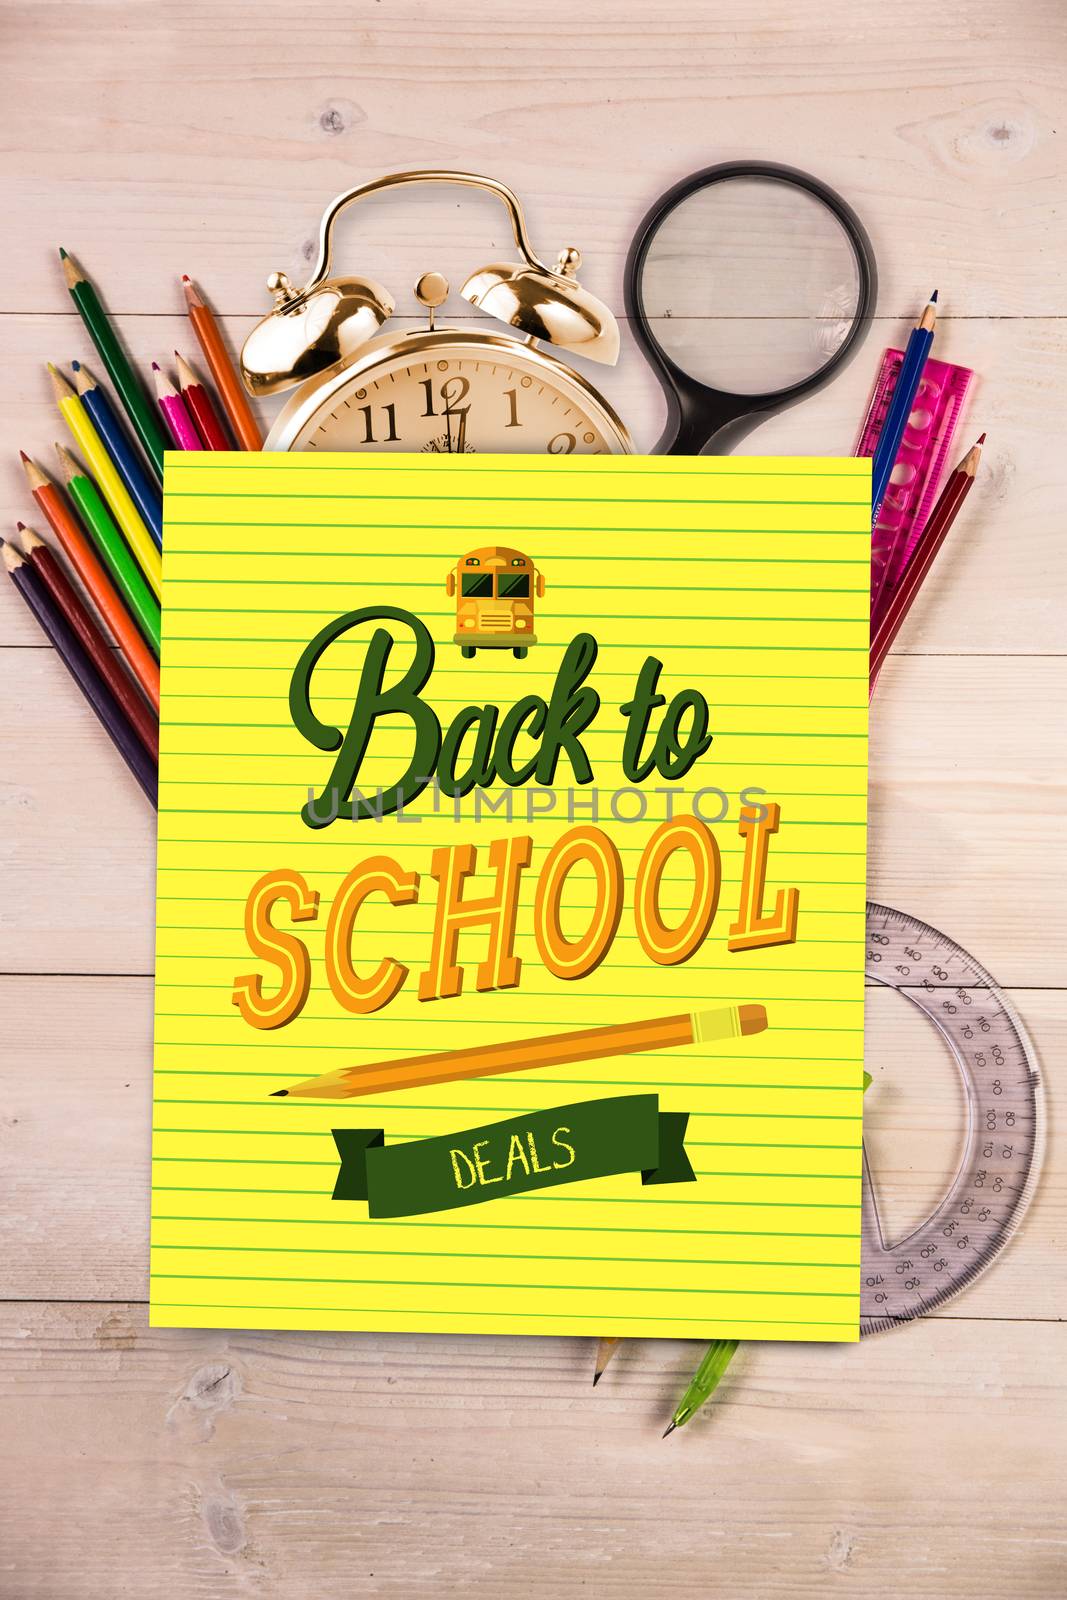 Composite image of back to school by Wavebreakmedia